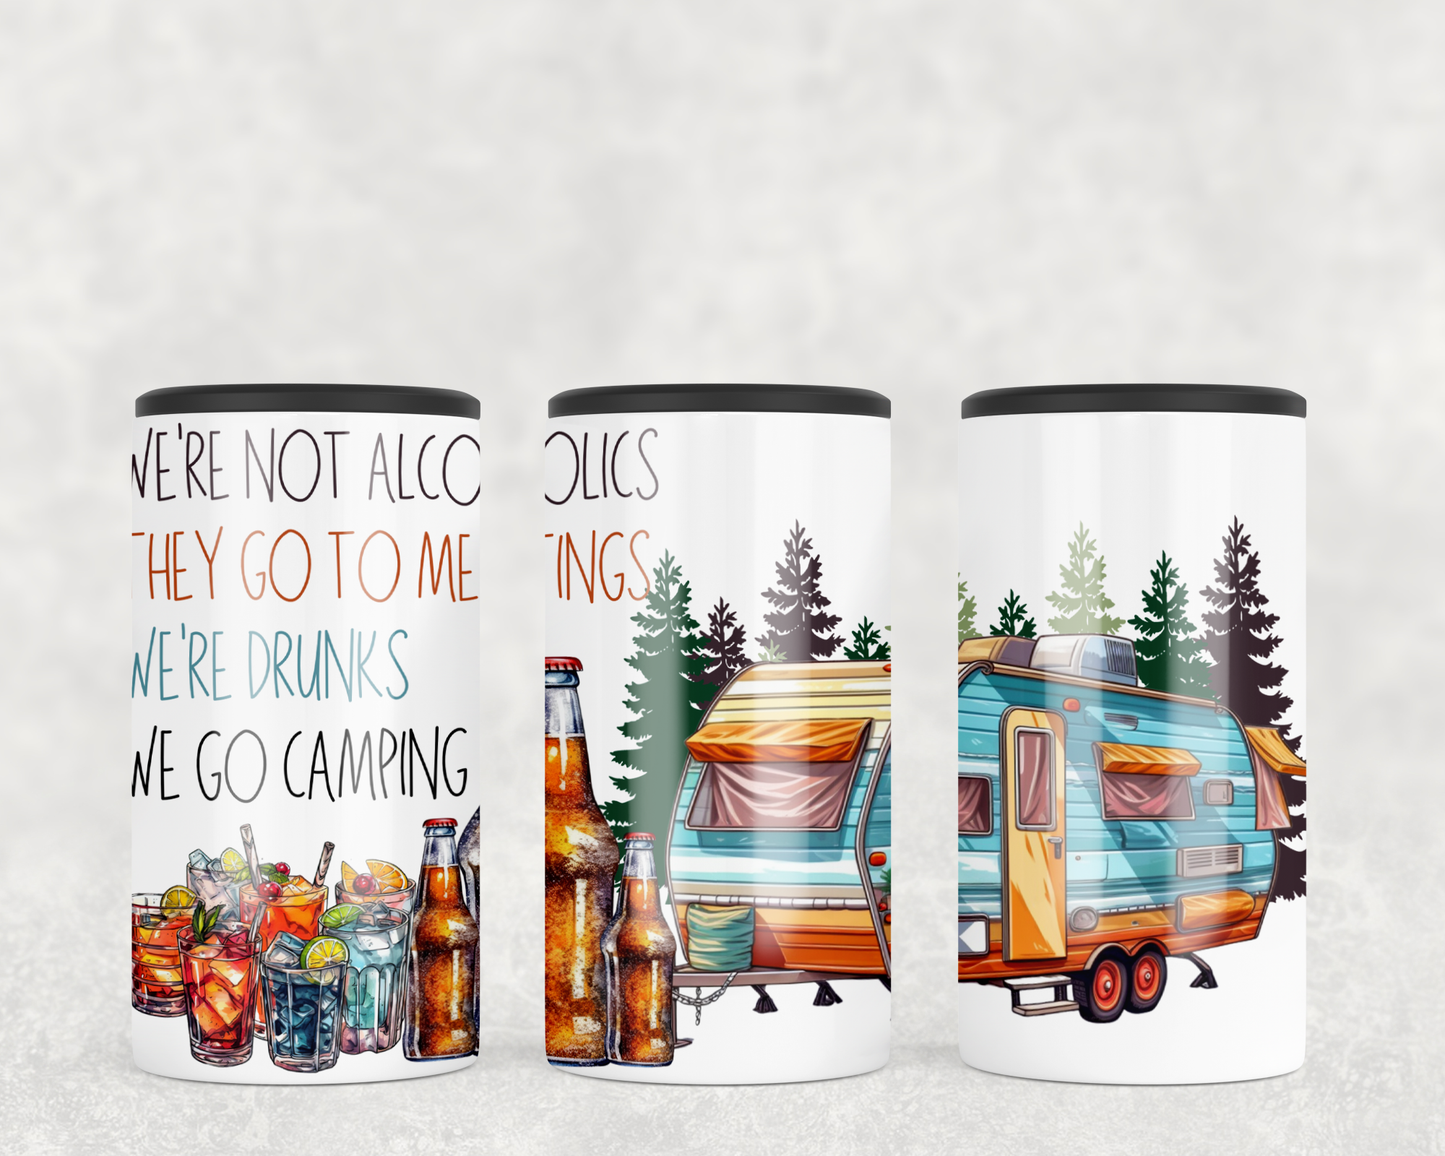 We're drunks, we go camping 4-in-1 12 oz. slim can cooler. Alcoholic drinks and a camper image.